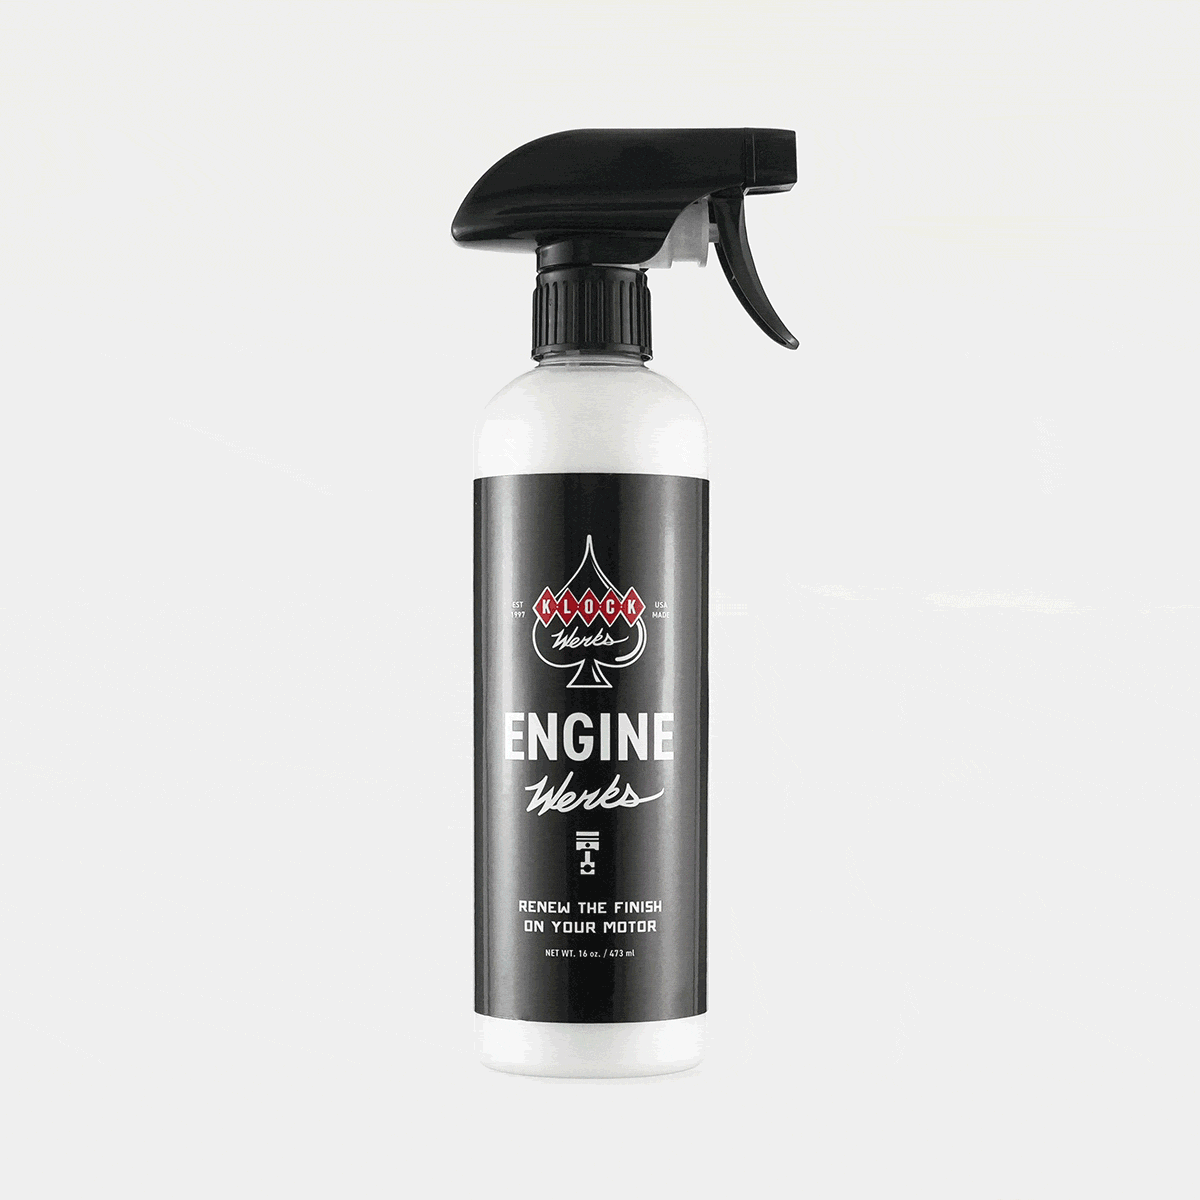 16 ounce Engine Werks cleaning product rotating bottle(16 oz. Engine Werks)